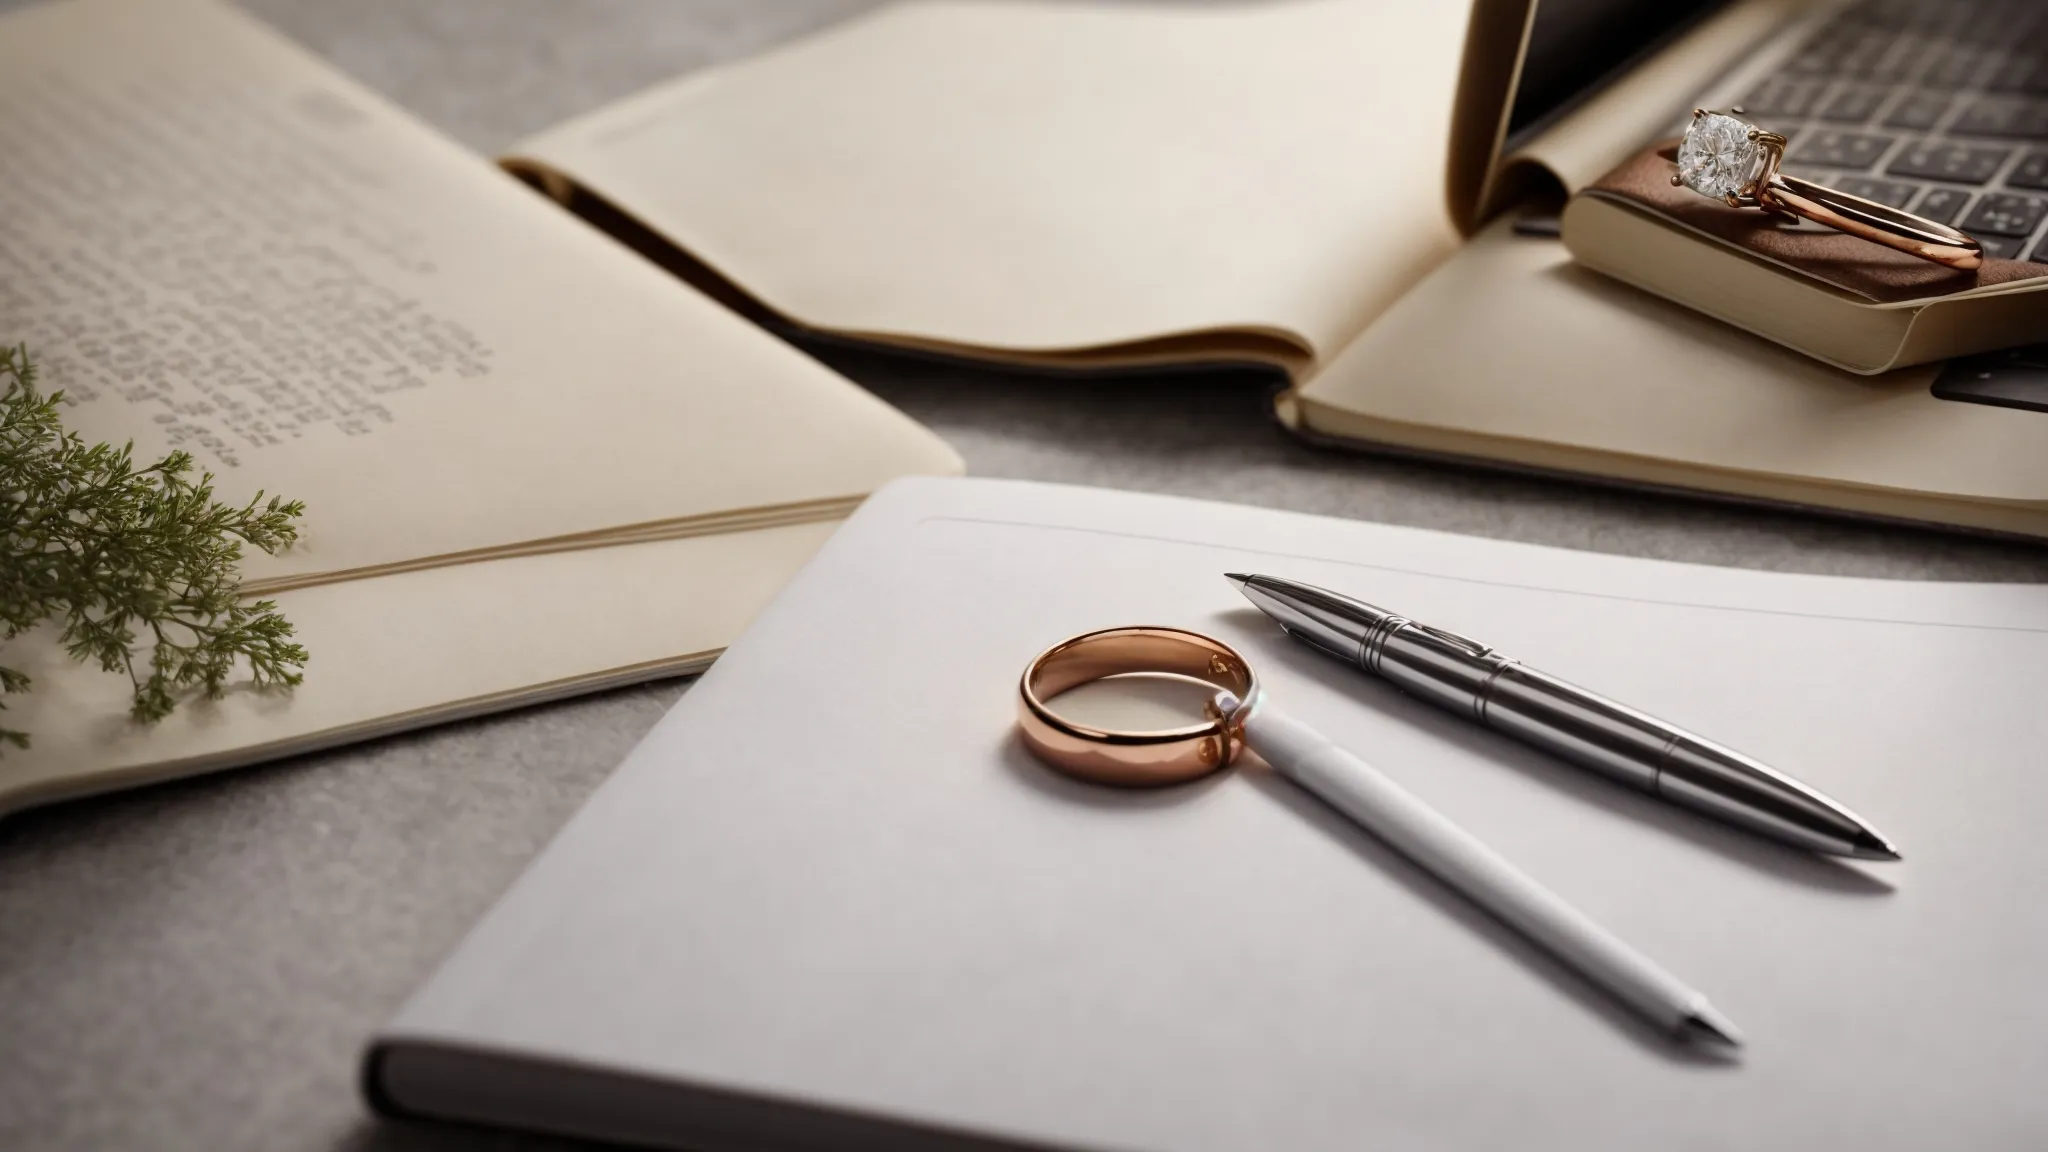 a wedding ring sits on a laptop keyboard next to a notebook and pen, symbolizing the union of marriage, seo, and pr.